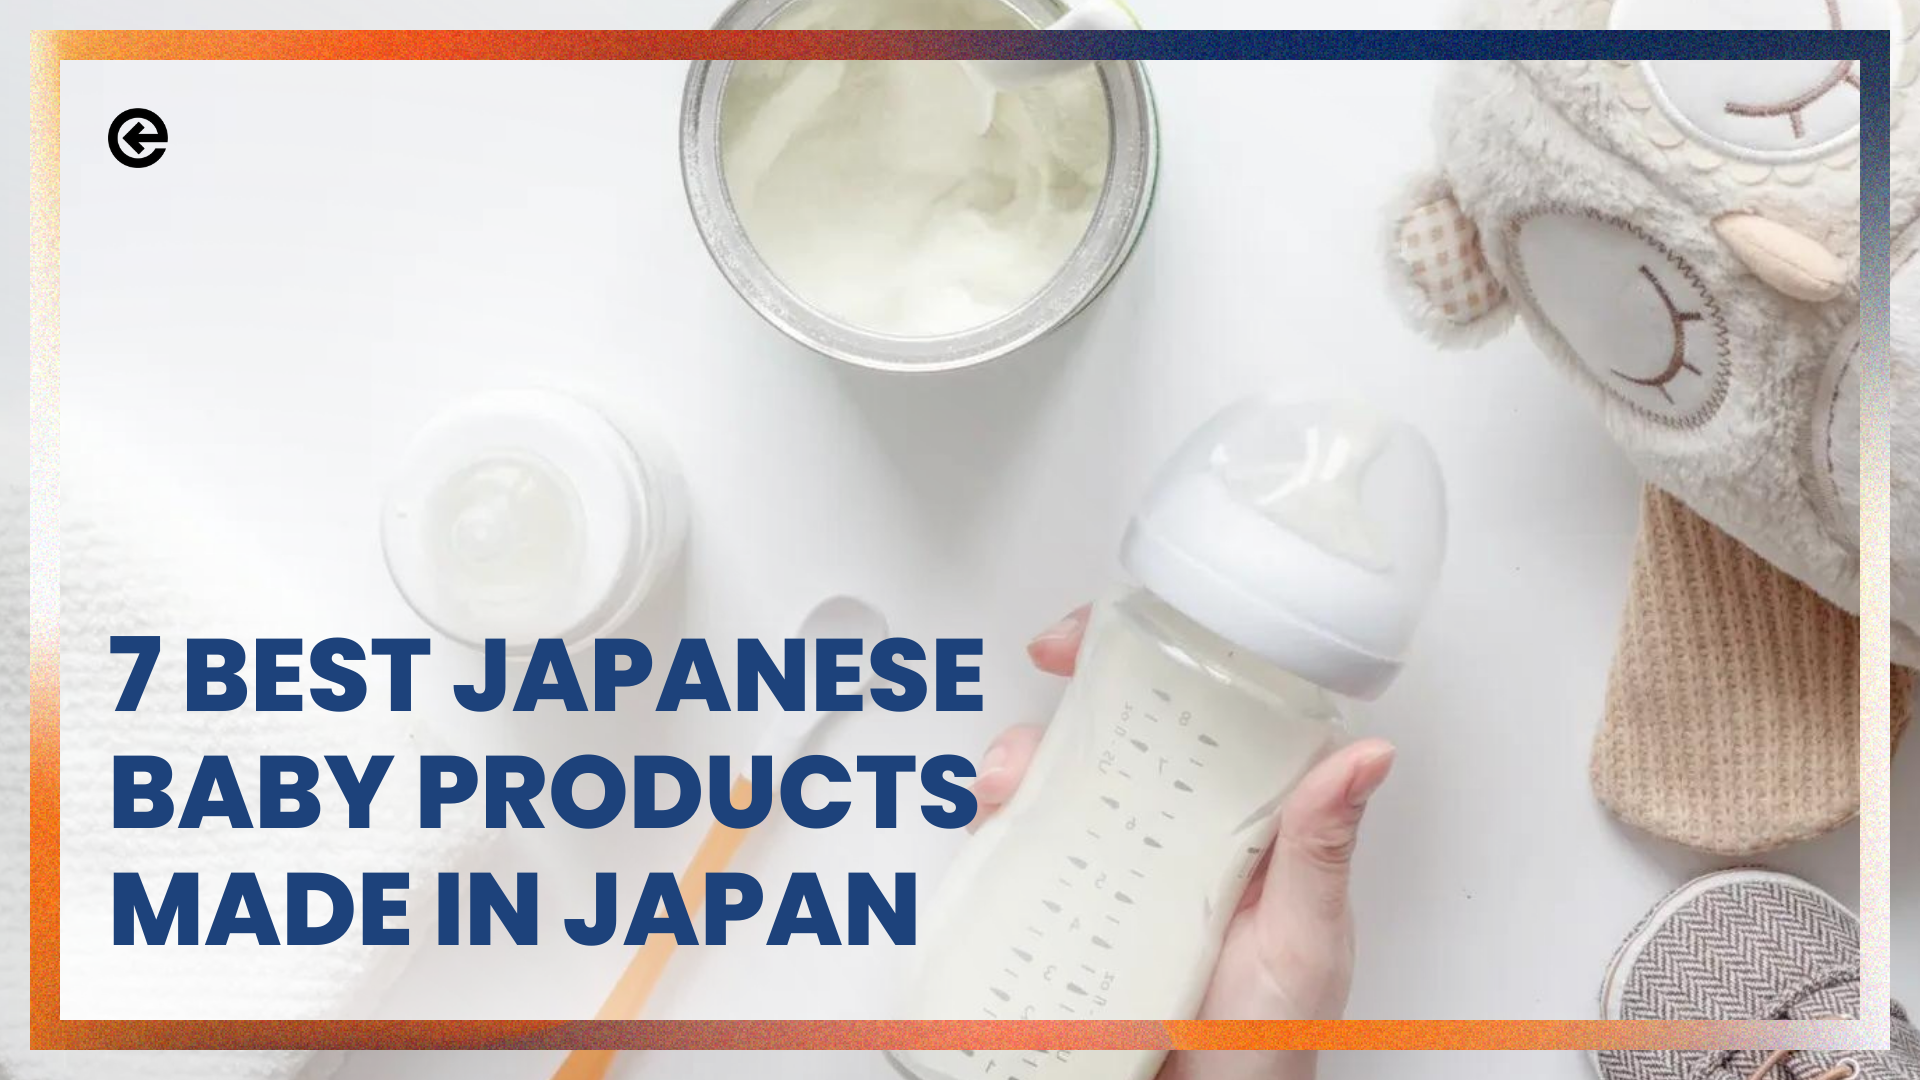 7 Best Japanese Baby Products Made in Japan